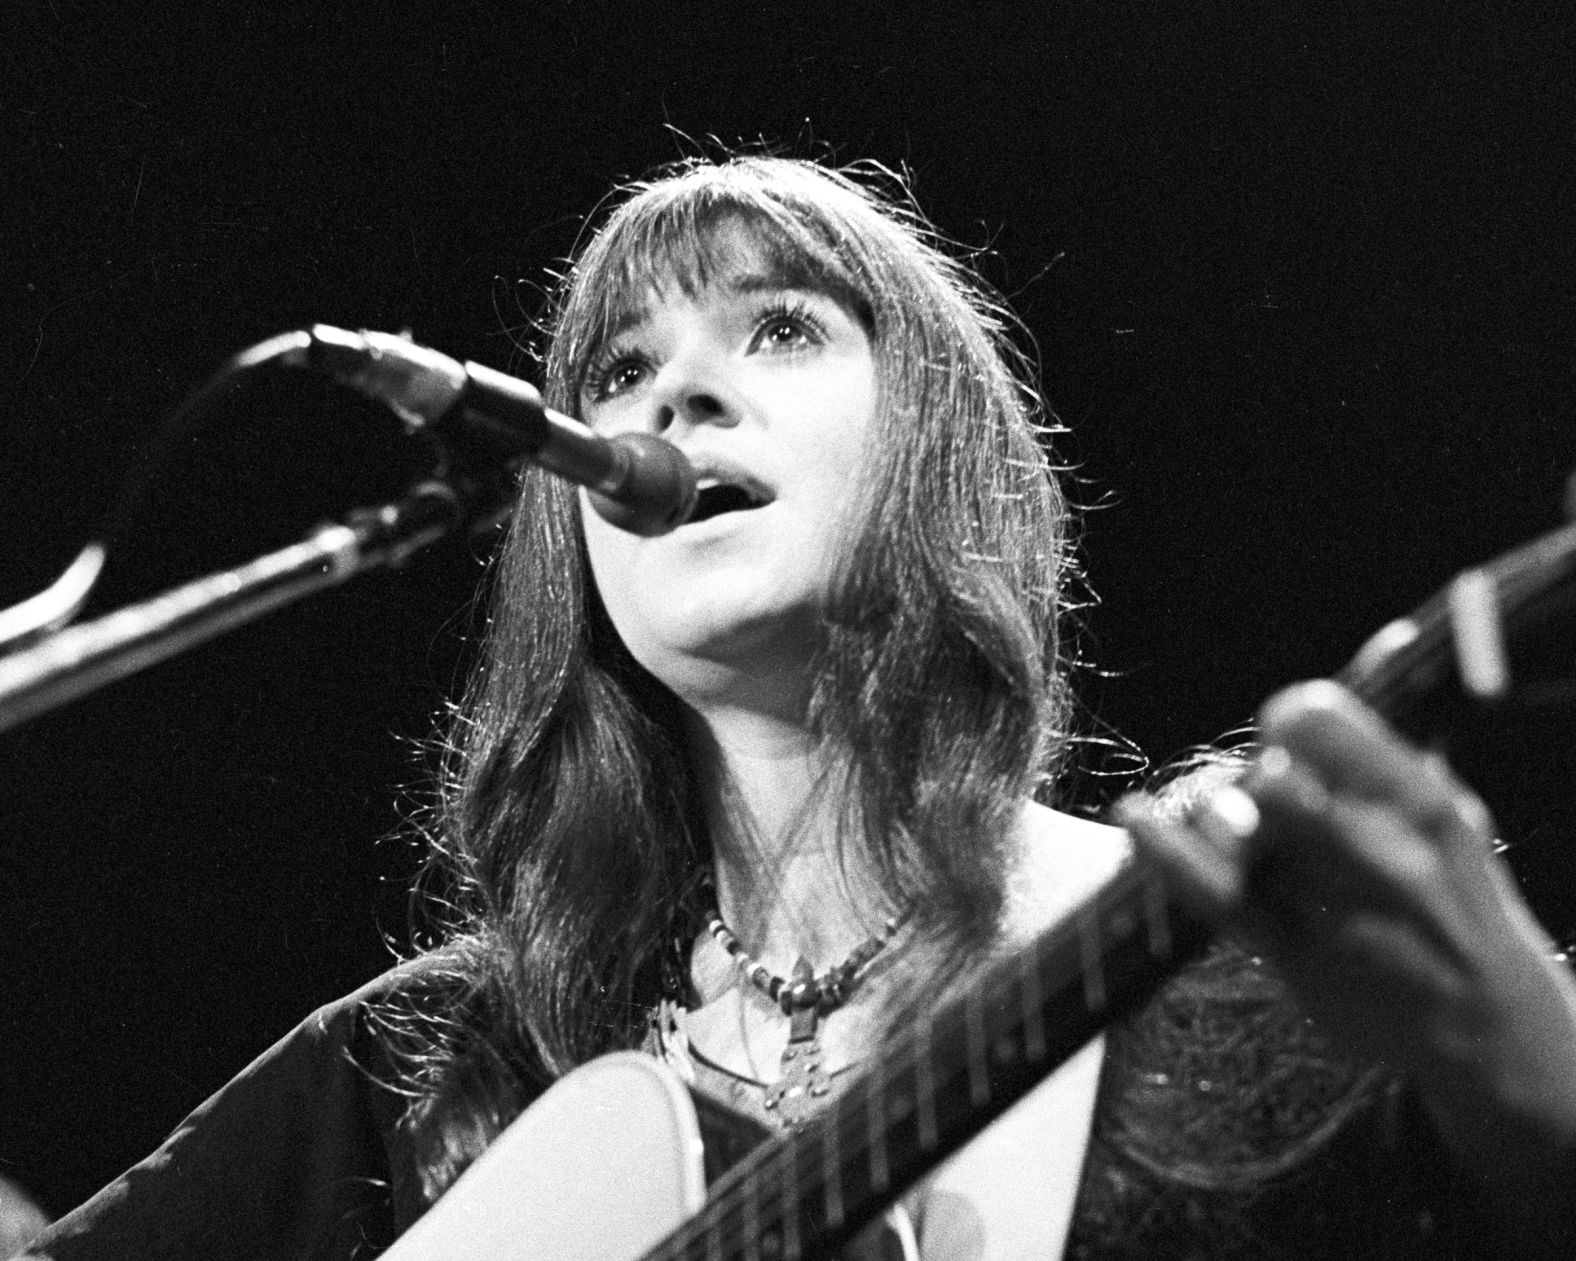 <a href="https://www.cnn.com/2024/01/25/entertainment/brand-new-key-singer-melanie-who-found-fame-at-woodstock-dead-at-76/index.html" target="_blank">Melanie Safka</a>, the singer who went by the mononym Melanie, died on January 23, according to Billy James of Glass Onyon PR. She was 76. Melanie performed at the Woodstock Festival in 1969 and was famous for songs including "Lay Down (Candles in the Rain)" and "Brand New Key."